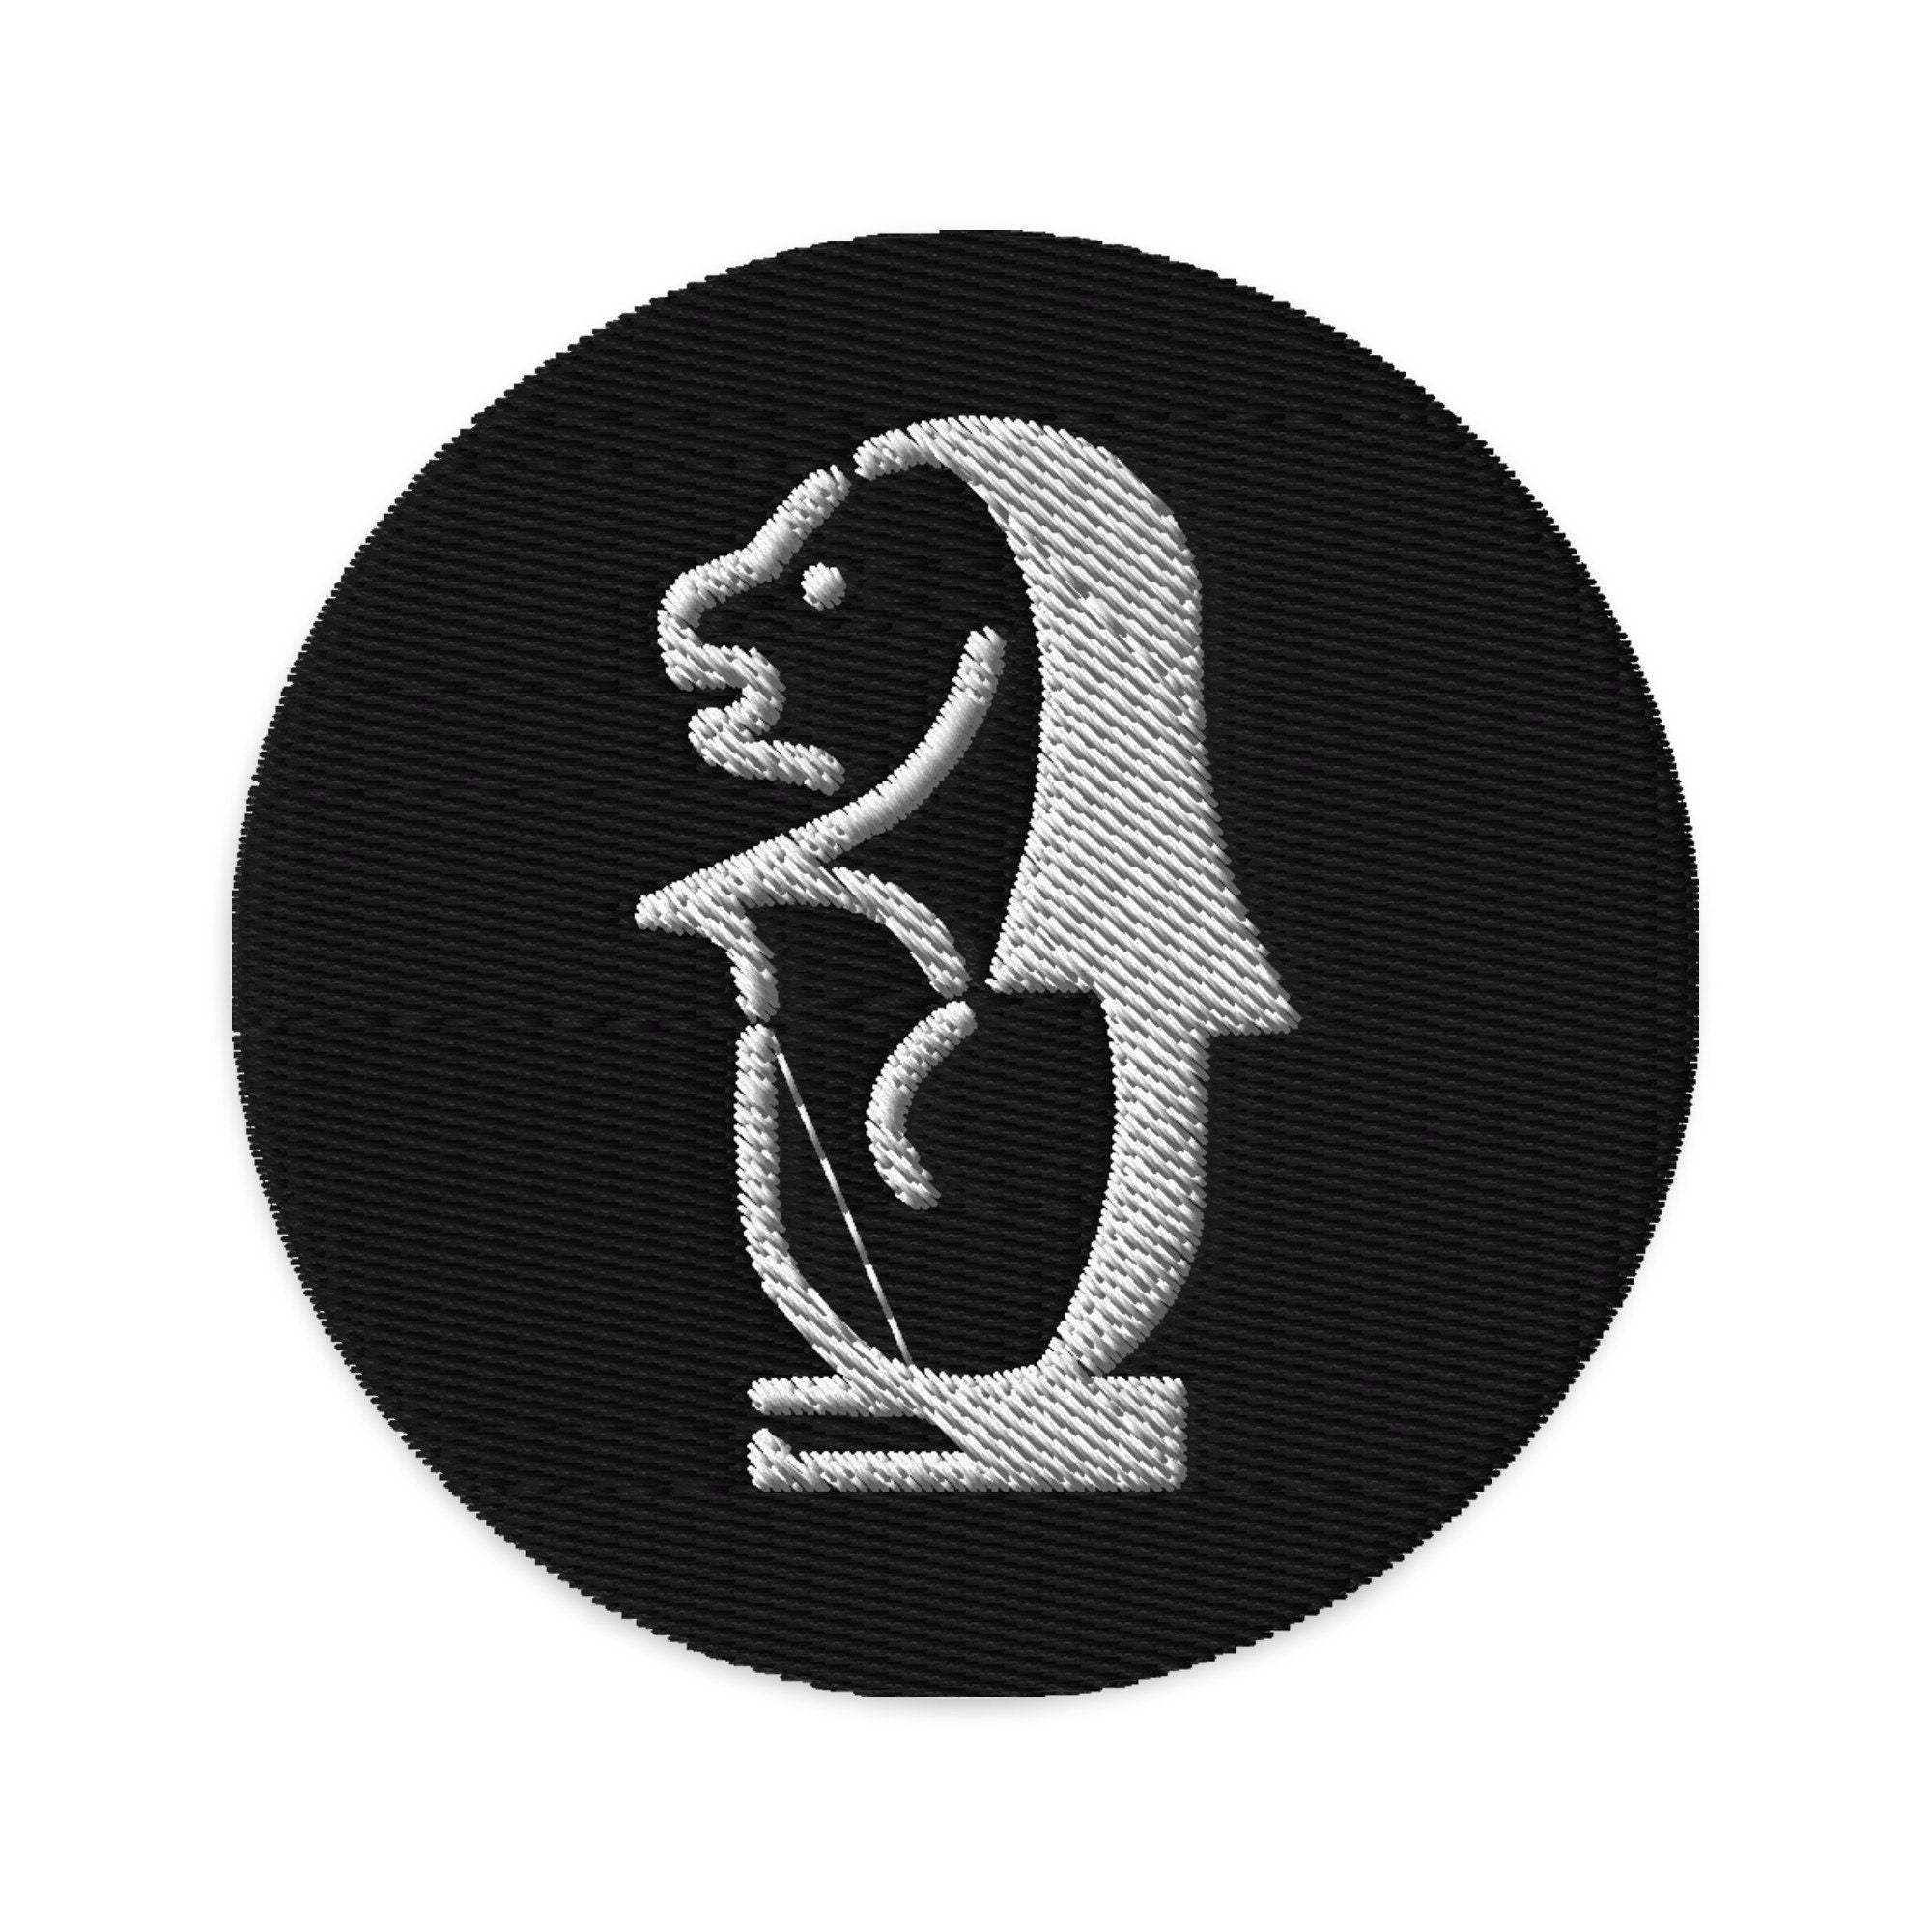 Merlion Embroidered Patch, Singapore Iron on Patch, Circular 3" Merlion Patch Embroidery, Circular Singapore Patches